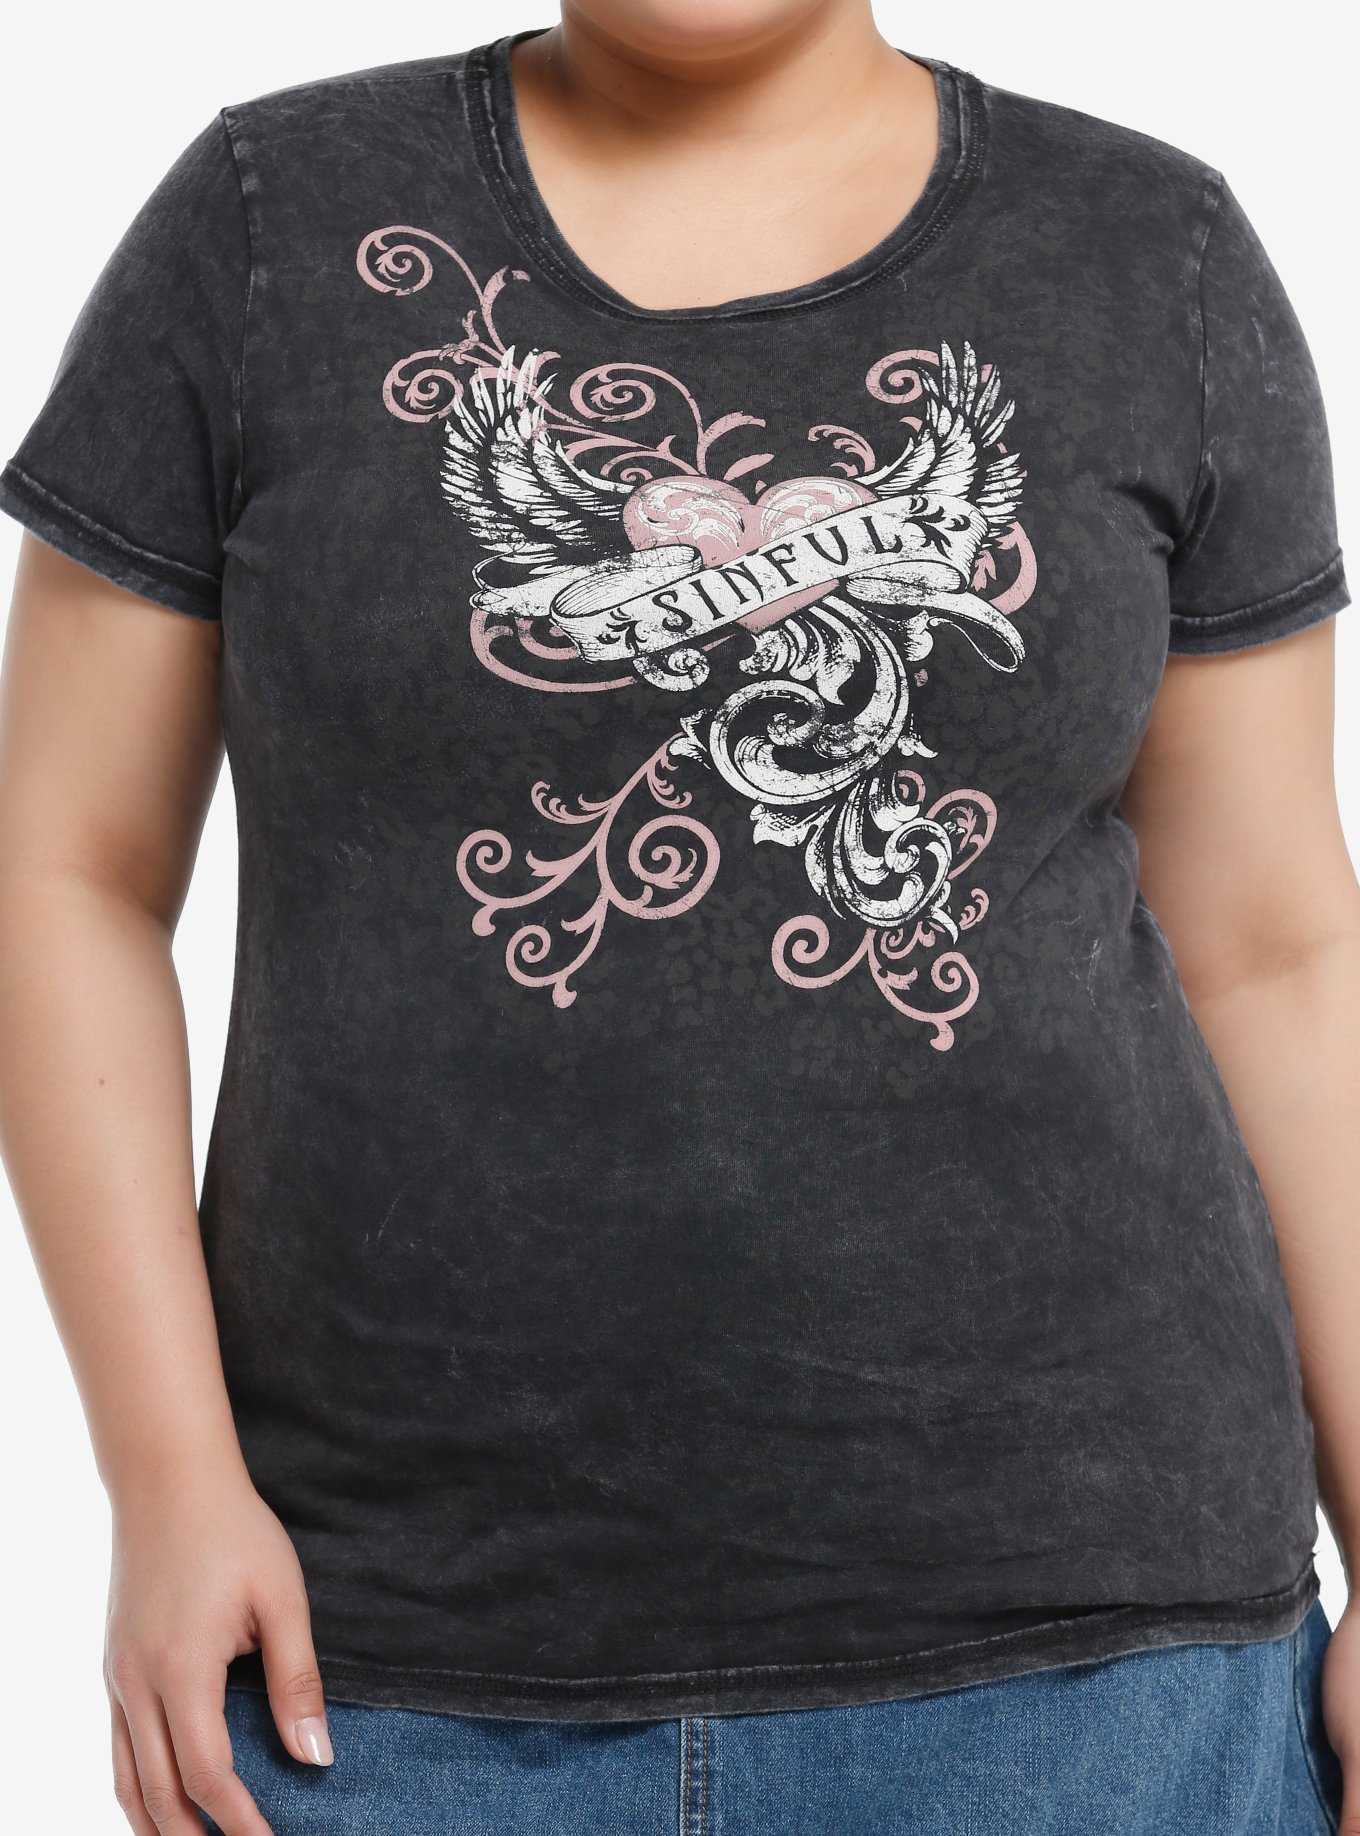 Social Collision Sinful Winged Heart Girls T-Shirt Plus Size, , hi-res